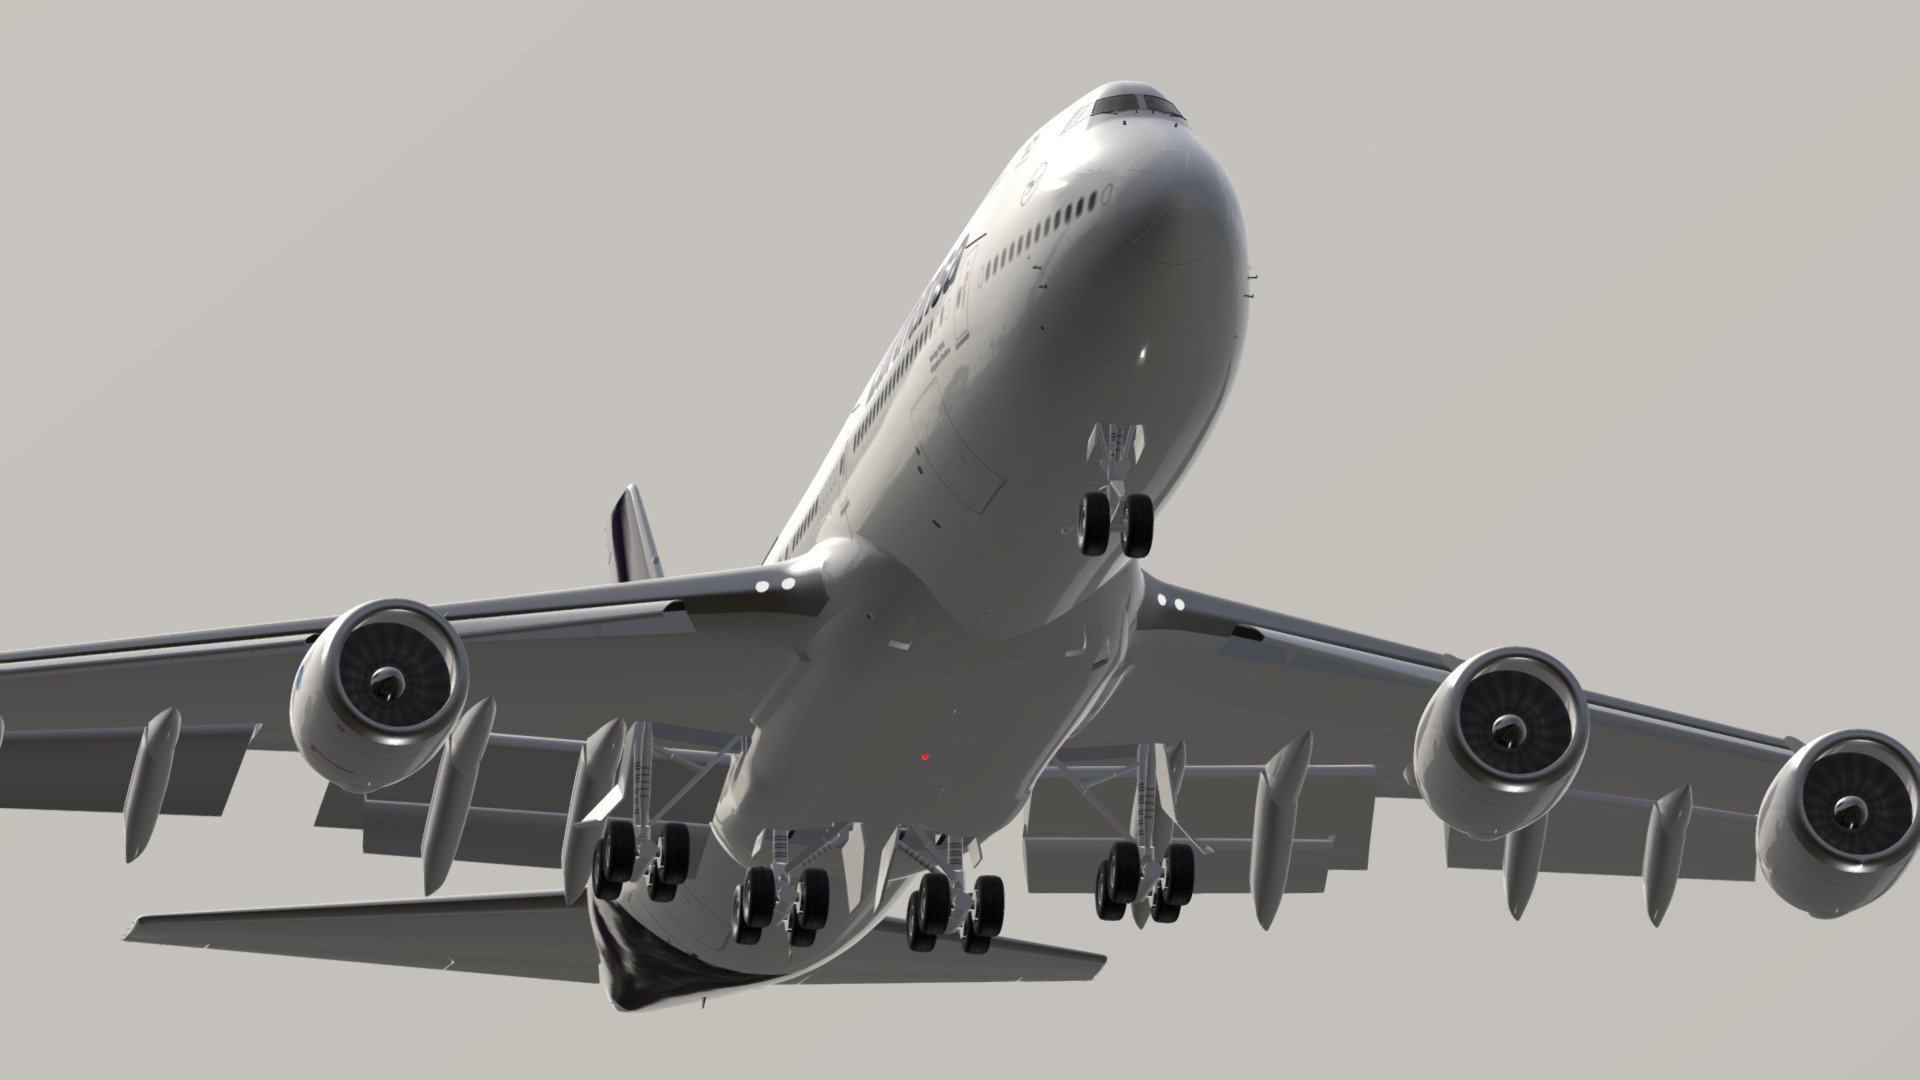 3D model of the Boeing 747-8i, featuring the latest Lufthansa livery.

This is the ground version of my model, with landing gear, flaps fully extended, and relaxed wings. Check also my flying version with flexed wings.

Created in Blender.

The Boeing 747 is a large, long–range wide-body airliner and cargo aircraft manufactured by Boeing Commercial Airplanes in the United States. The lastest version, 747-8, was launched on November 14, 2005, with new General Electric GEnx engines, and was first delivered in October 2011. The passenger version, named 747-8 Intercontinental or 747-8i, can carry 467 passengers in a typical three-class configuration over 7,790 nmi (14,430 km). The -8i’s upper deck is lengthened compared to the 747-400; the wing is thicker and deeper, holding more fuel, and wider with raked wingtips.

The 747-8i is the biggest airliner of the Boeing Company, and the world’s fastest commercial jet.

Specifications: Length 250 ft 2 in / 76.3 m Height 63 ft 6 in / 19.4 m Wingspan 224 ft 7 in / 68.4 m - Boeing 747-8i (ground version) - Buy Royalty Free 3D model by Fel P (@philpay) 3d model